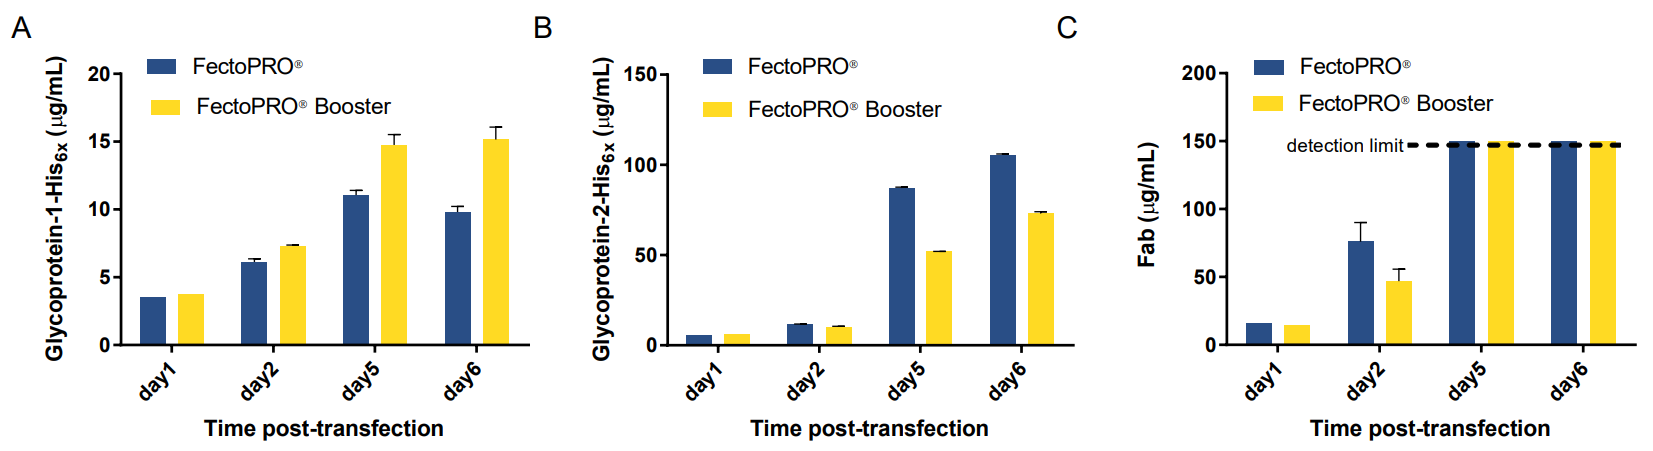 FectoPRO Booster transfection